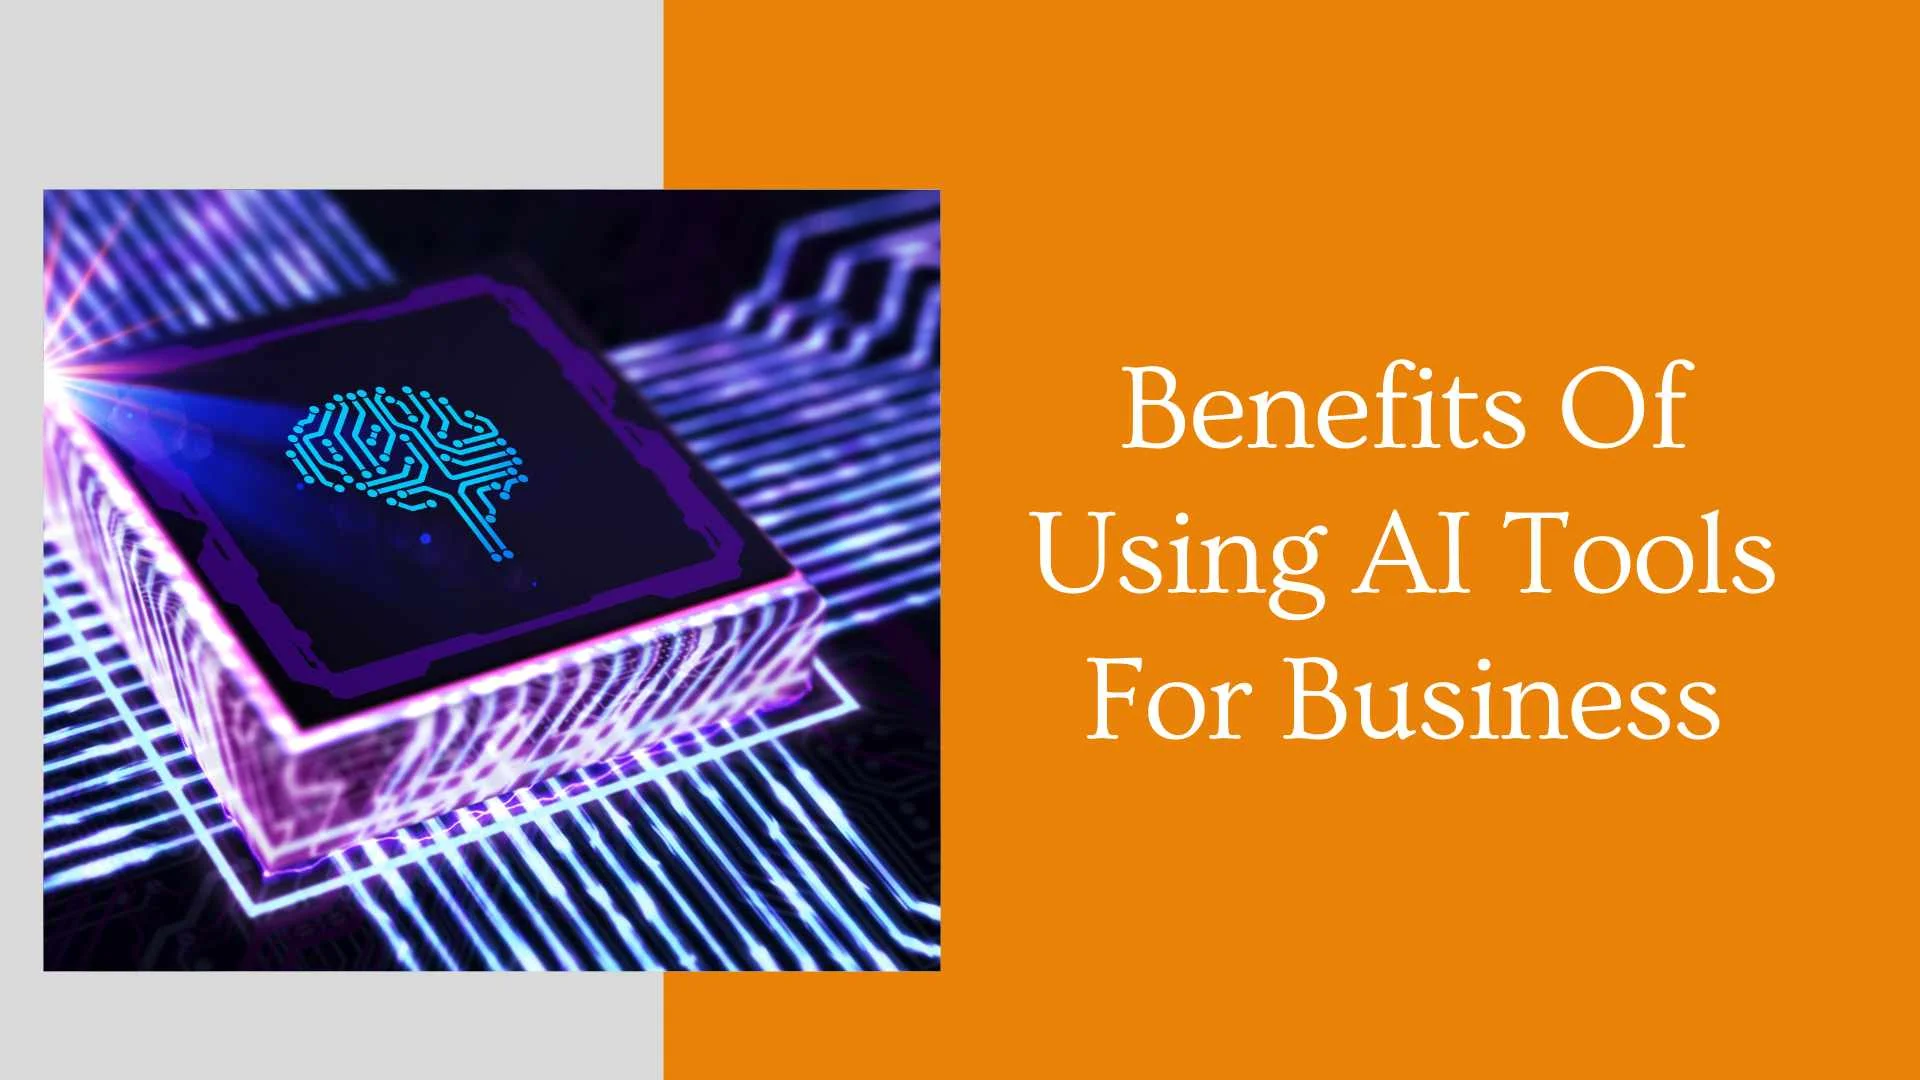 Benefits Of Using AI Tools For Business